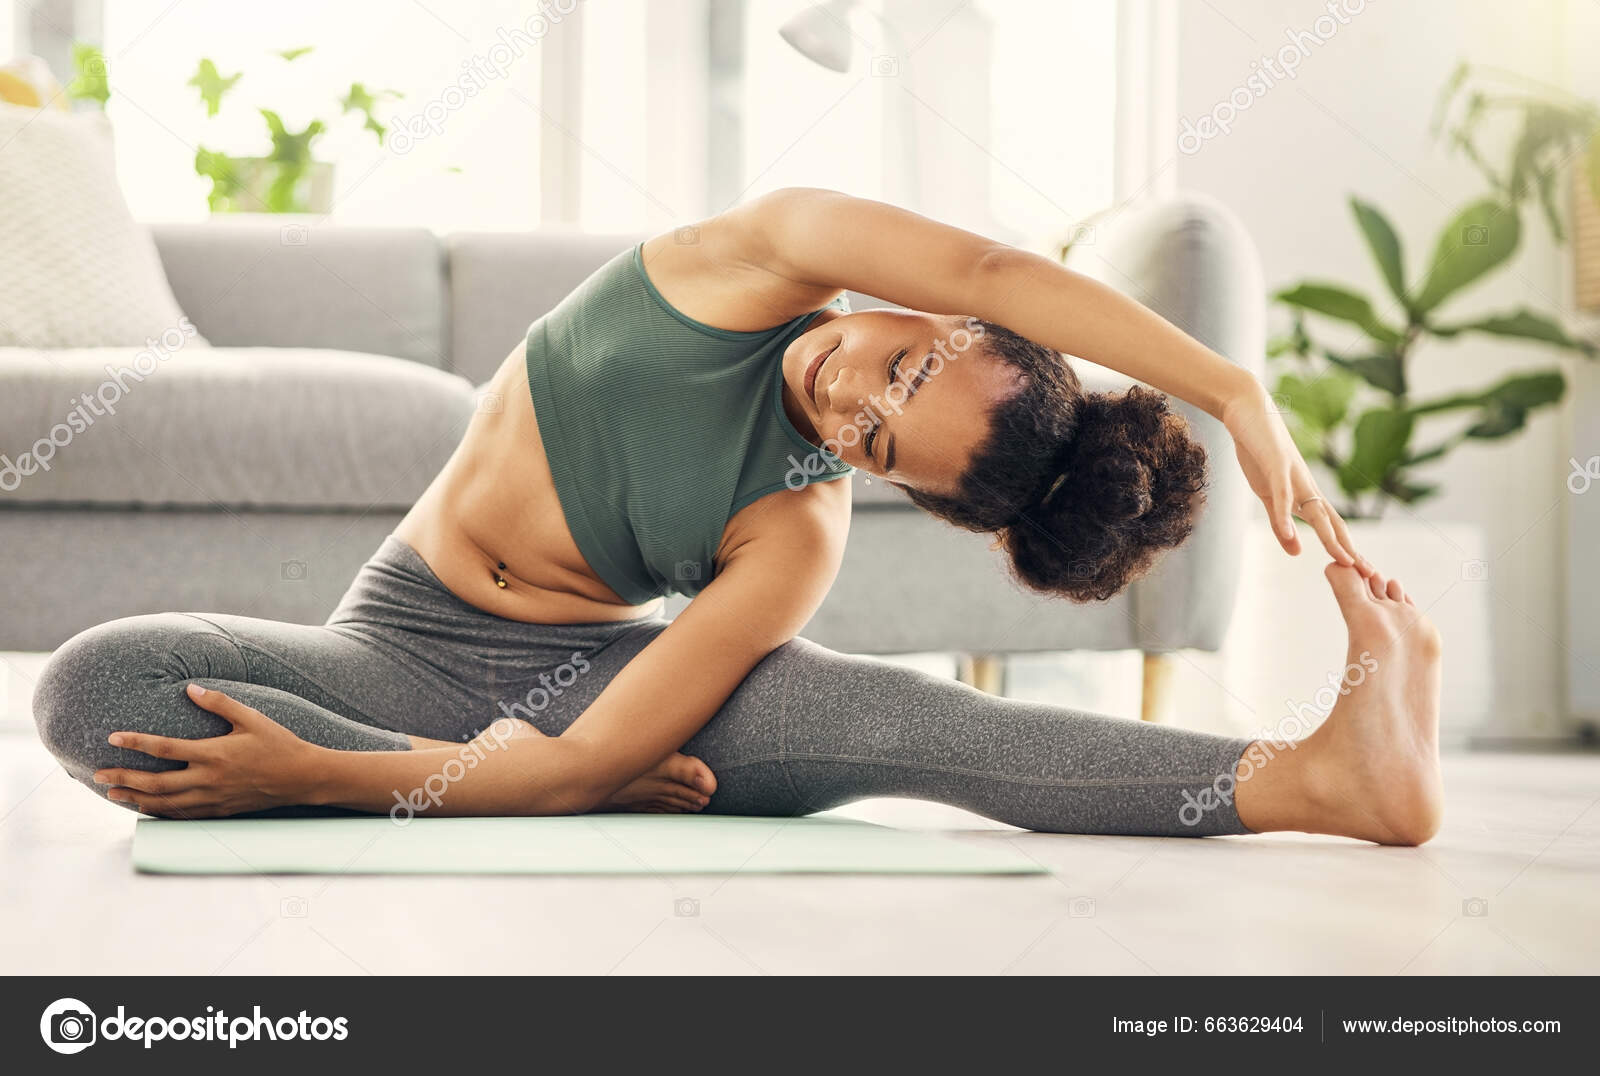 Yoga Stretching Woman Living Room Floor Training Exercise Mental Health  Stock Photo by ©PeopleImages.com 663629404